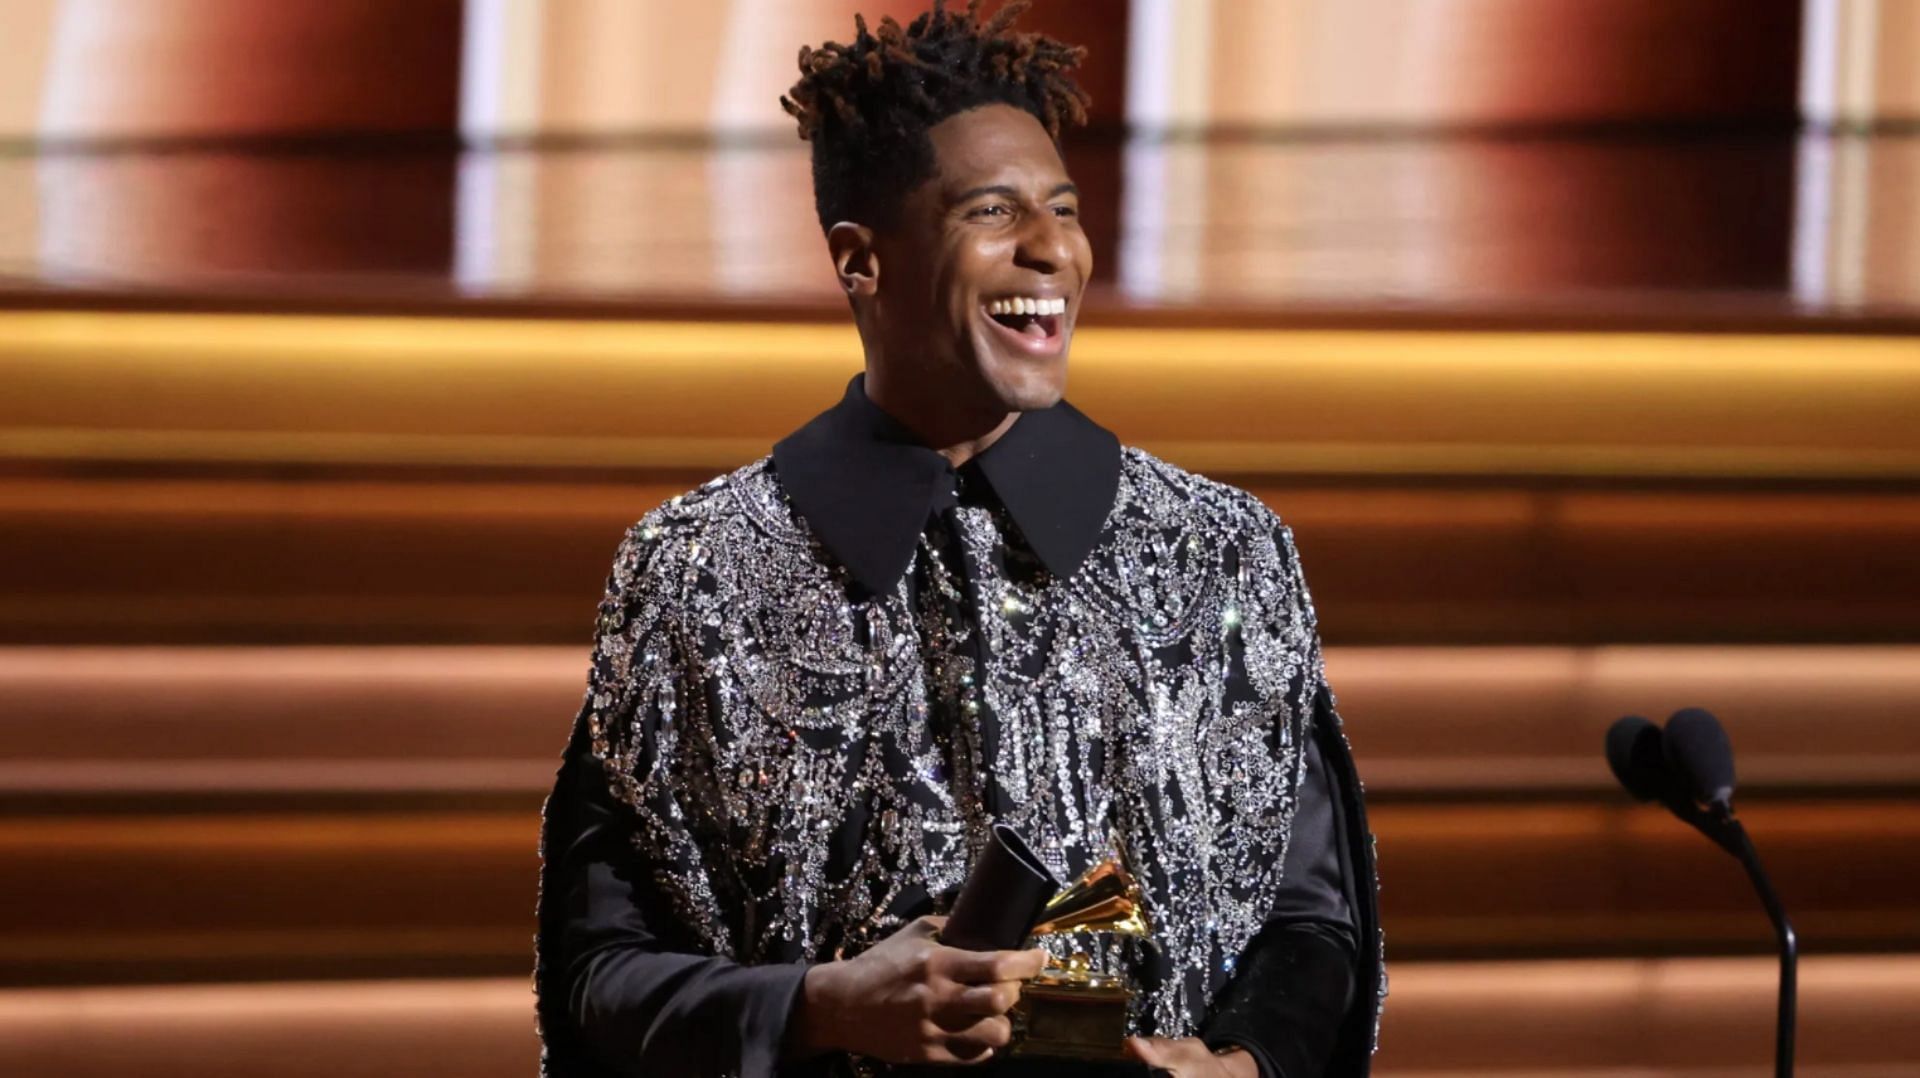 Jon Batiste won a Grammy in the Album of the Year category for his record We Are, among four other awards (Image via Matt Winkelmeyer/Getty Images)